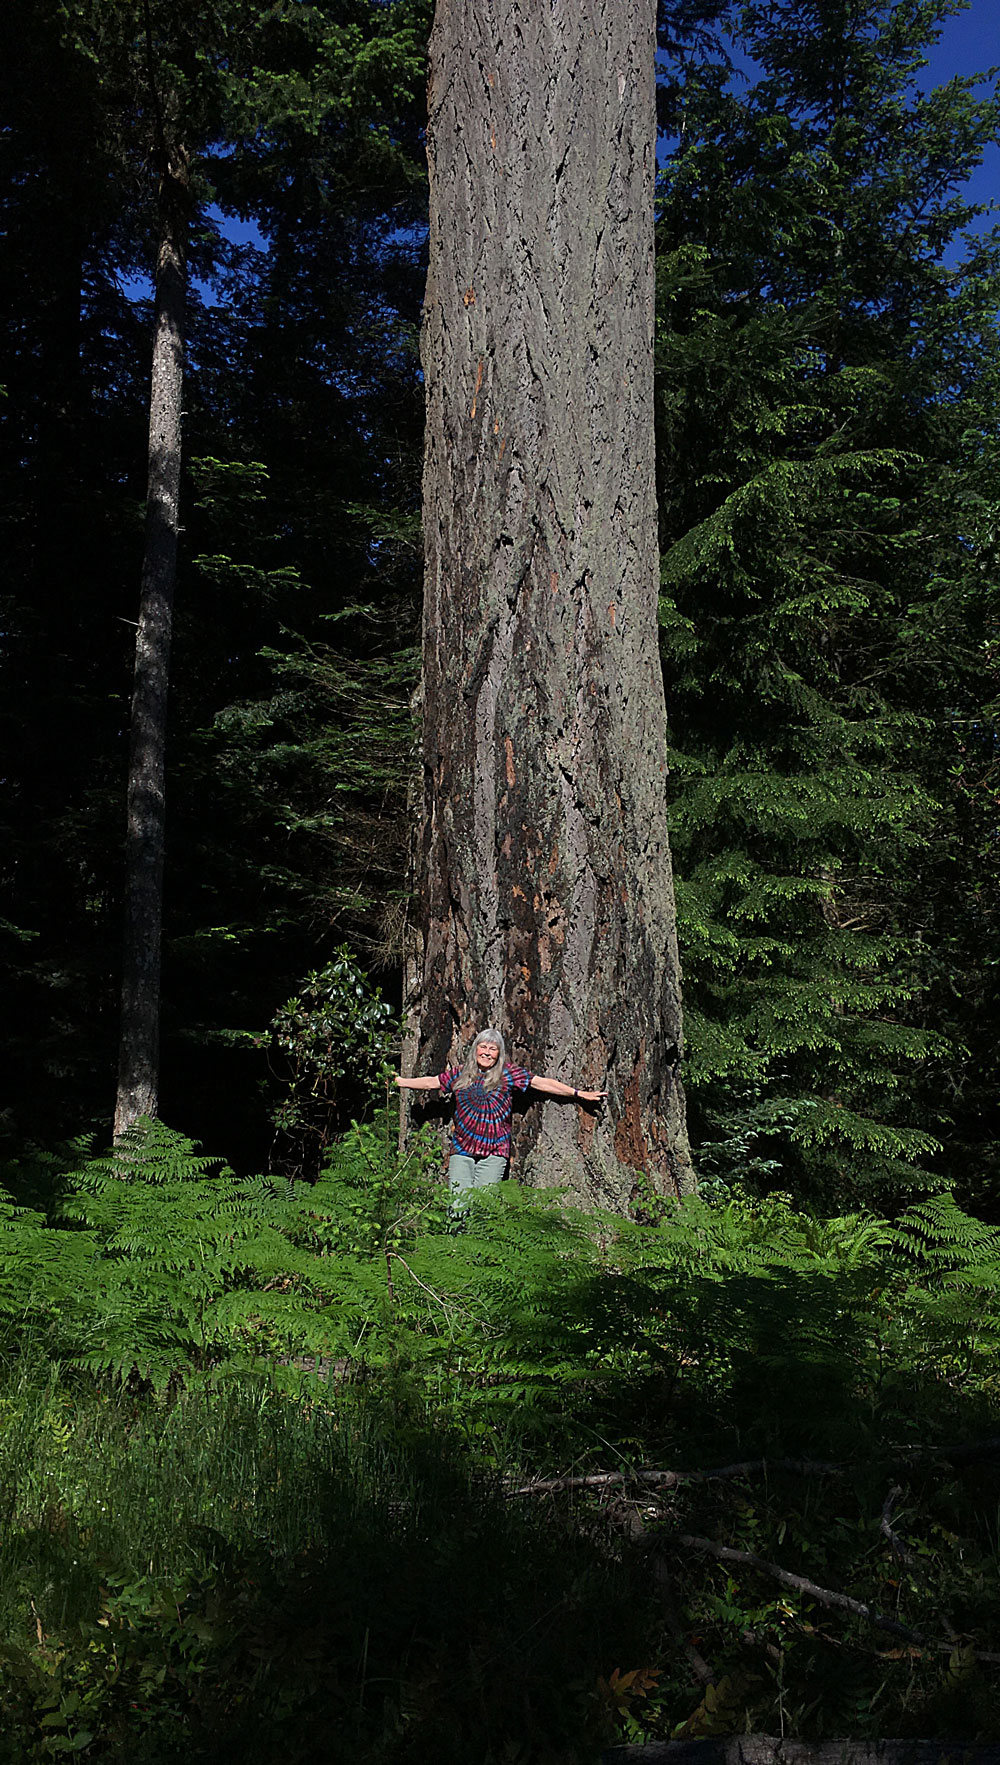 Woman standing in front of big Douglas-fir tree, arms outstretched.